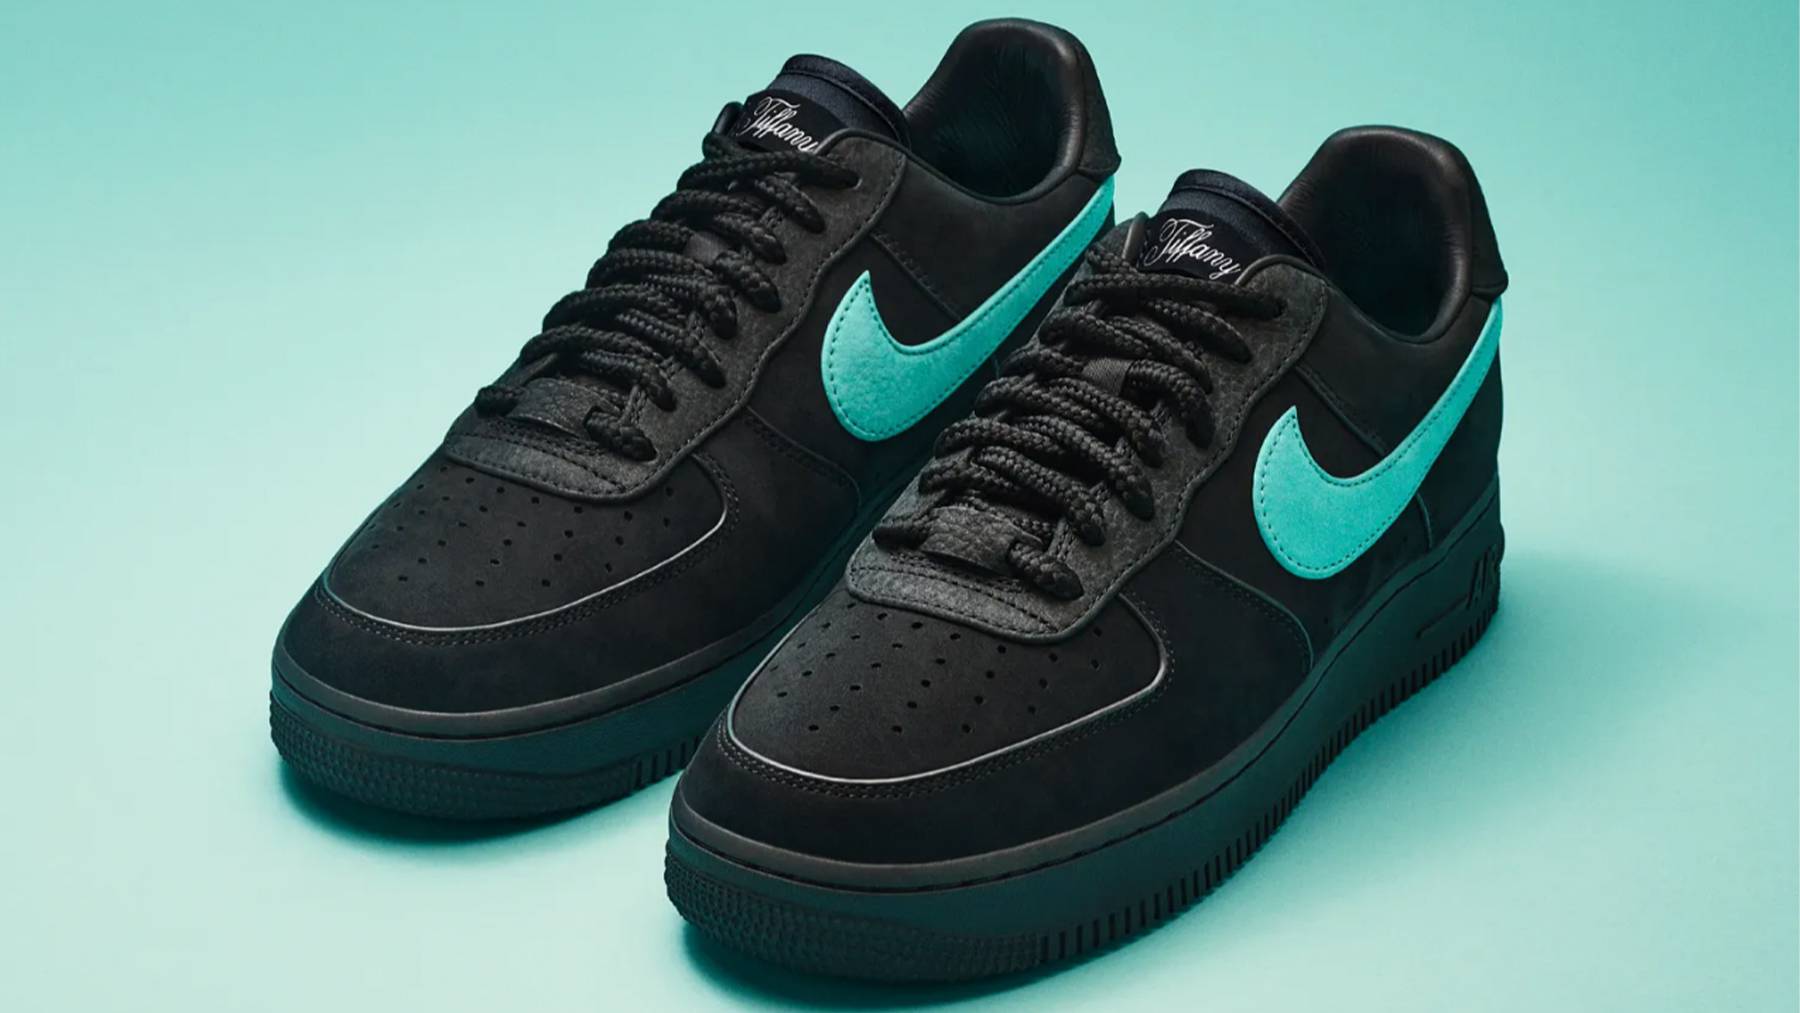 Tiffany and Nike have collaborated to create a $400 Nike Air Force 1 Low sneaker, which is facing criticism from sneakerheads.